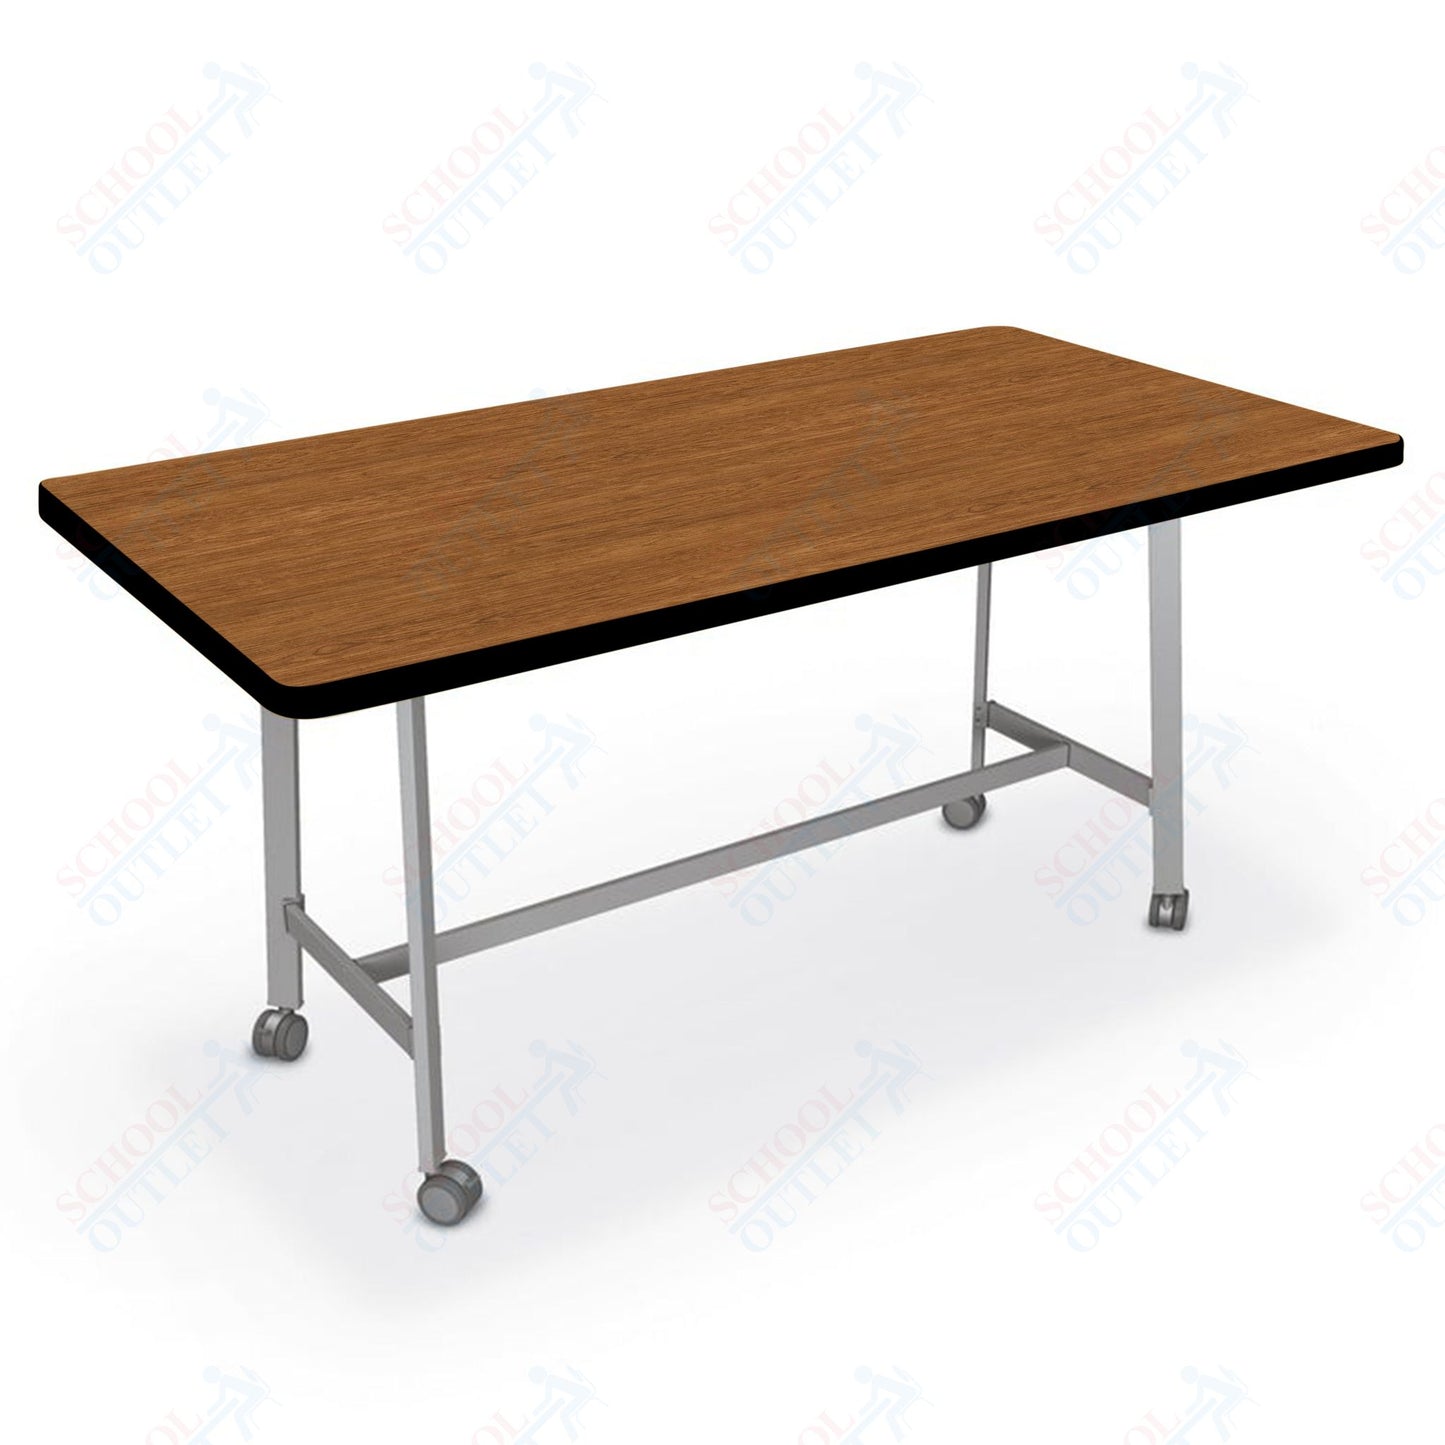 Mooreco Akt Table – 36"D x 72"W Rectangle, Laminate or Butcher Block Top, Fixed Height Available in 29"H, 36"H, or 42"H